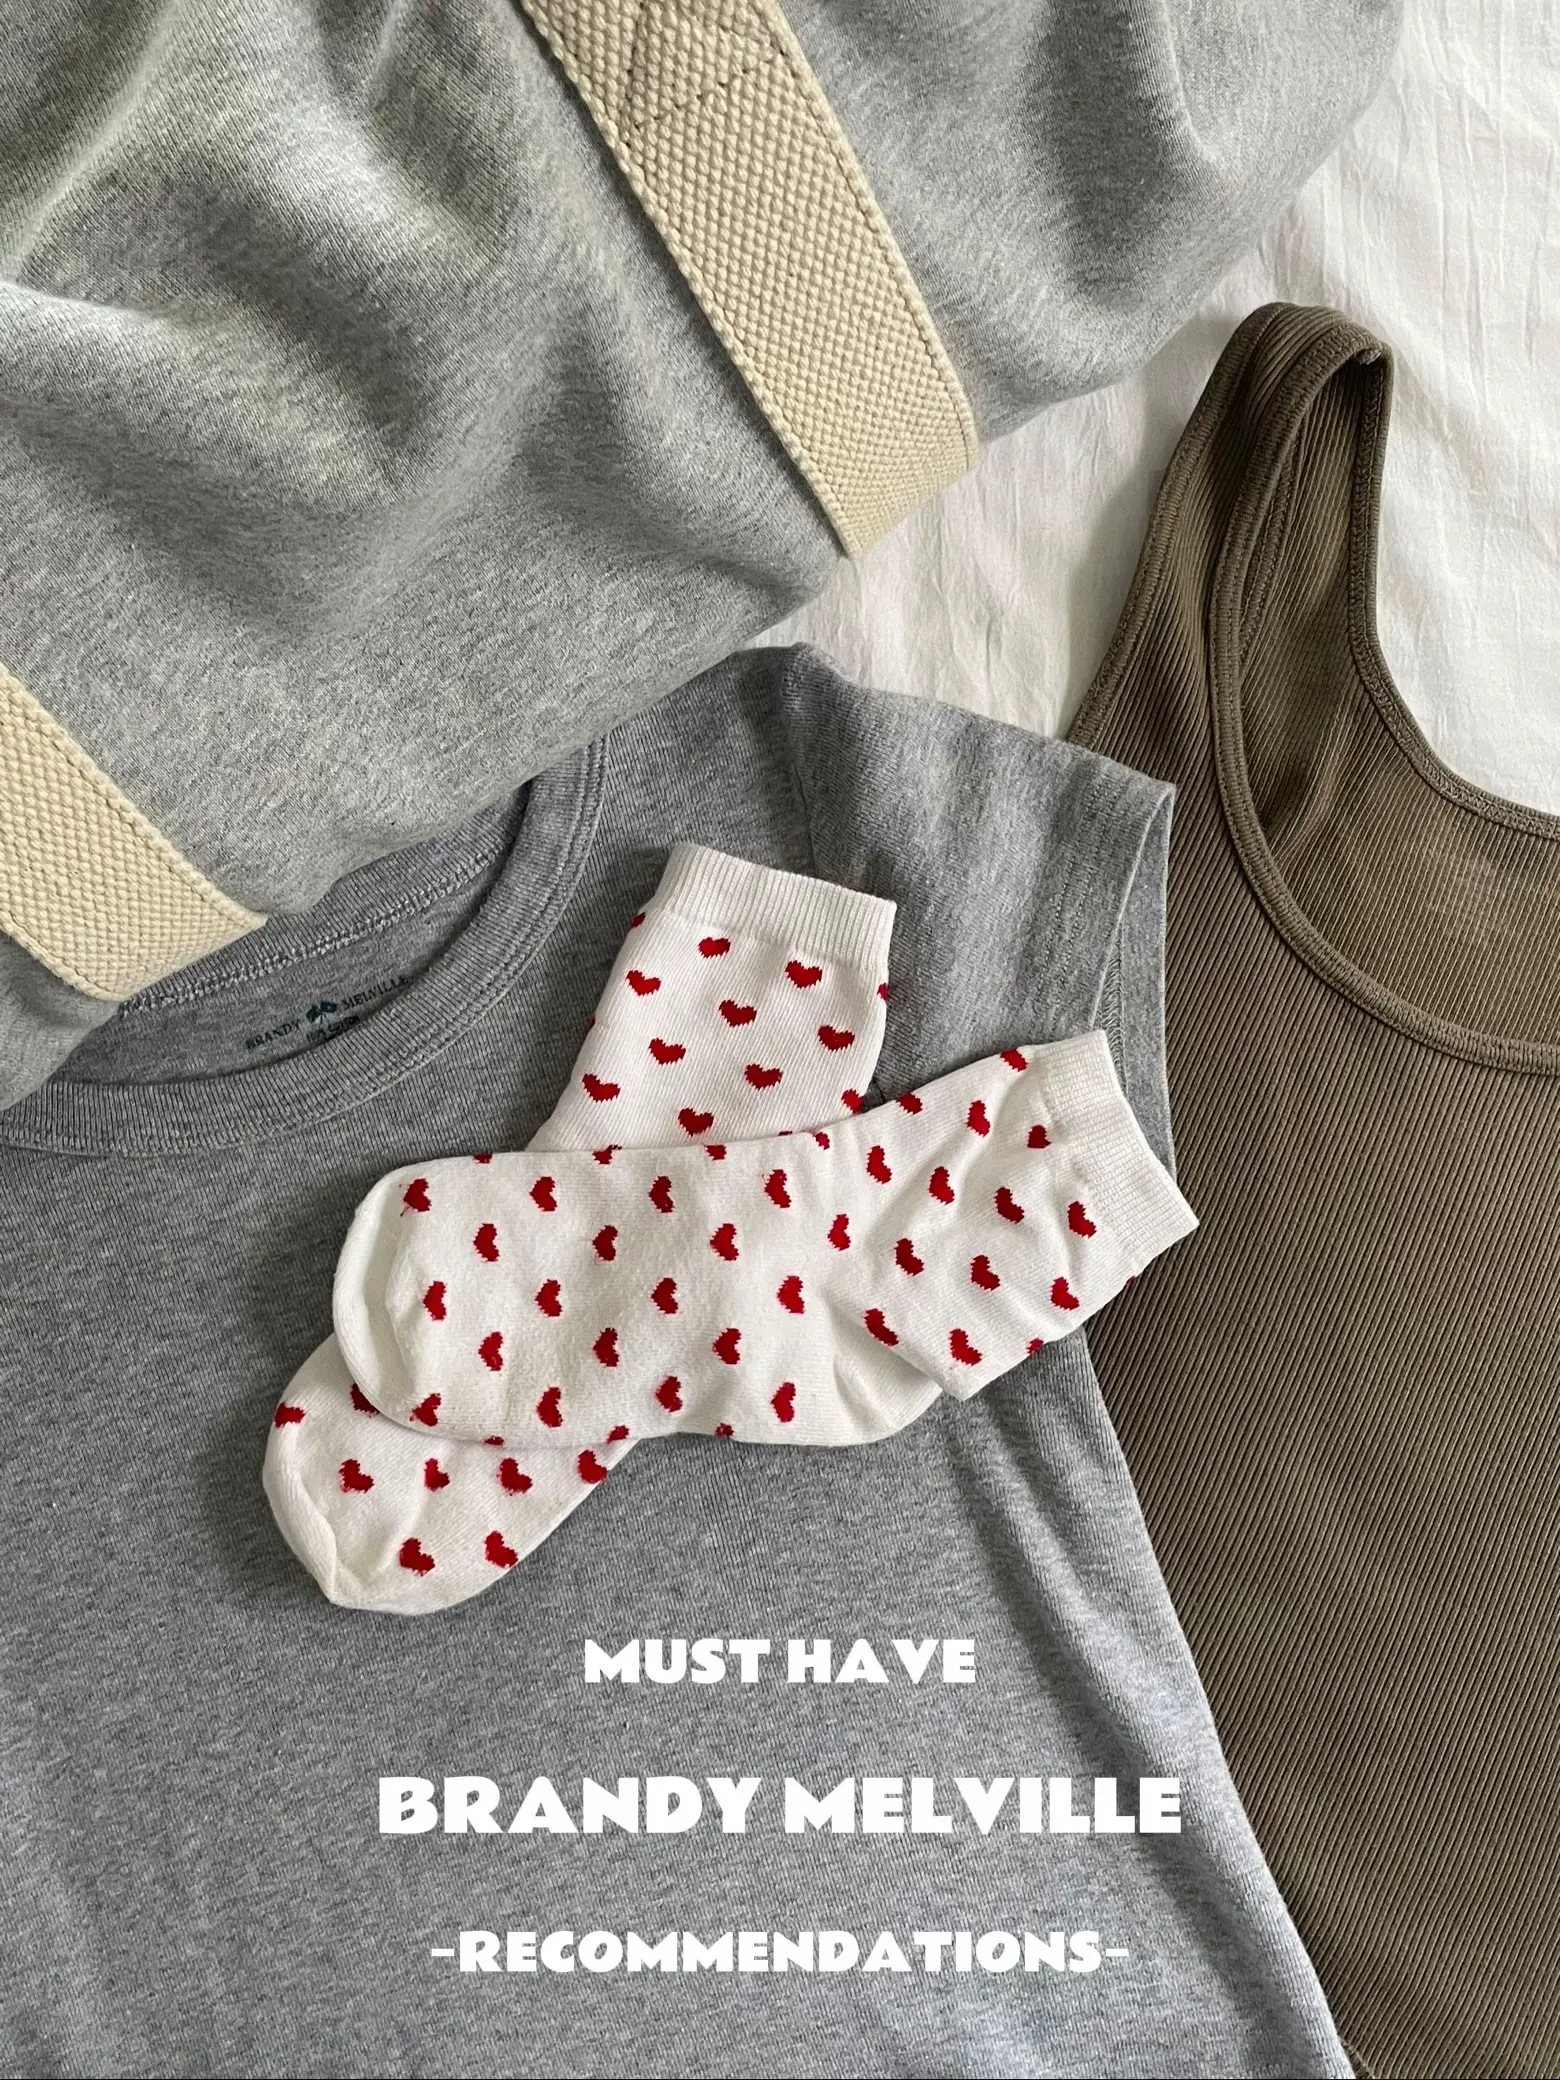 MUST HAVE BRANDY MELVILLE RECOMMENDATIONS, Gallery posted by Yeraz Bozuklu